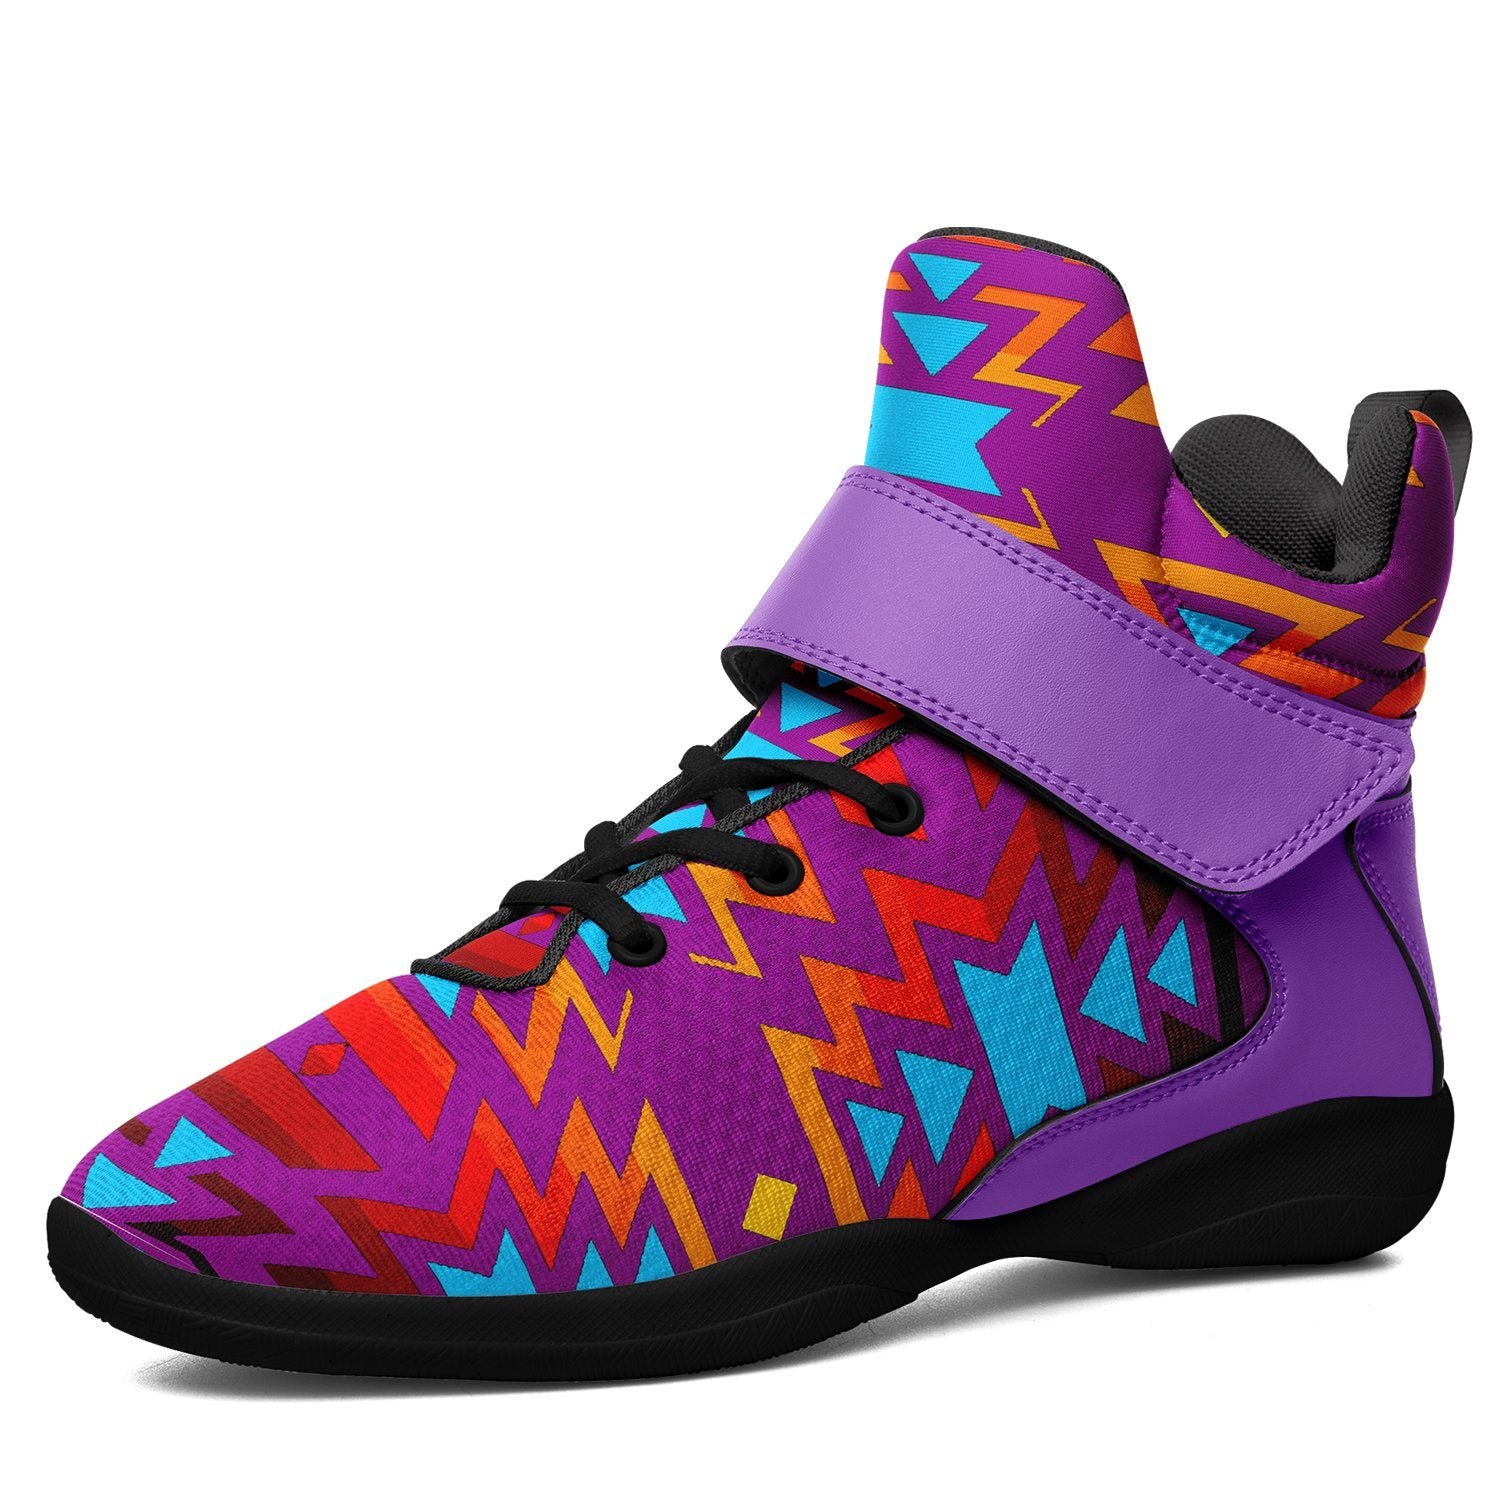 Fire Colors and Turquoise Purple Ipottaa Basketball / Sport High Top Shoes 49 Dzine US Child 12.5 / EUR 30 Black Sole with Lavender Strap 